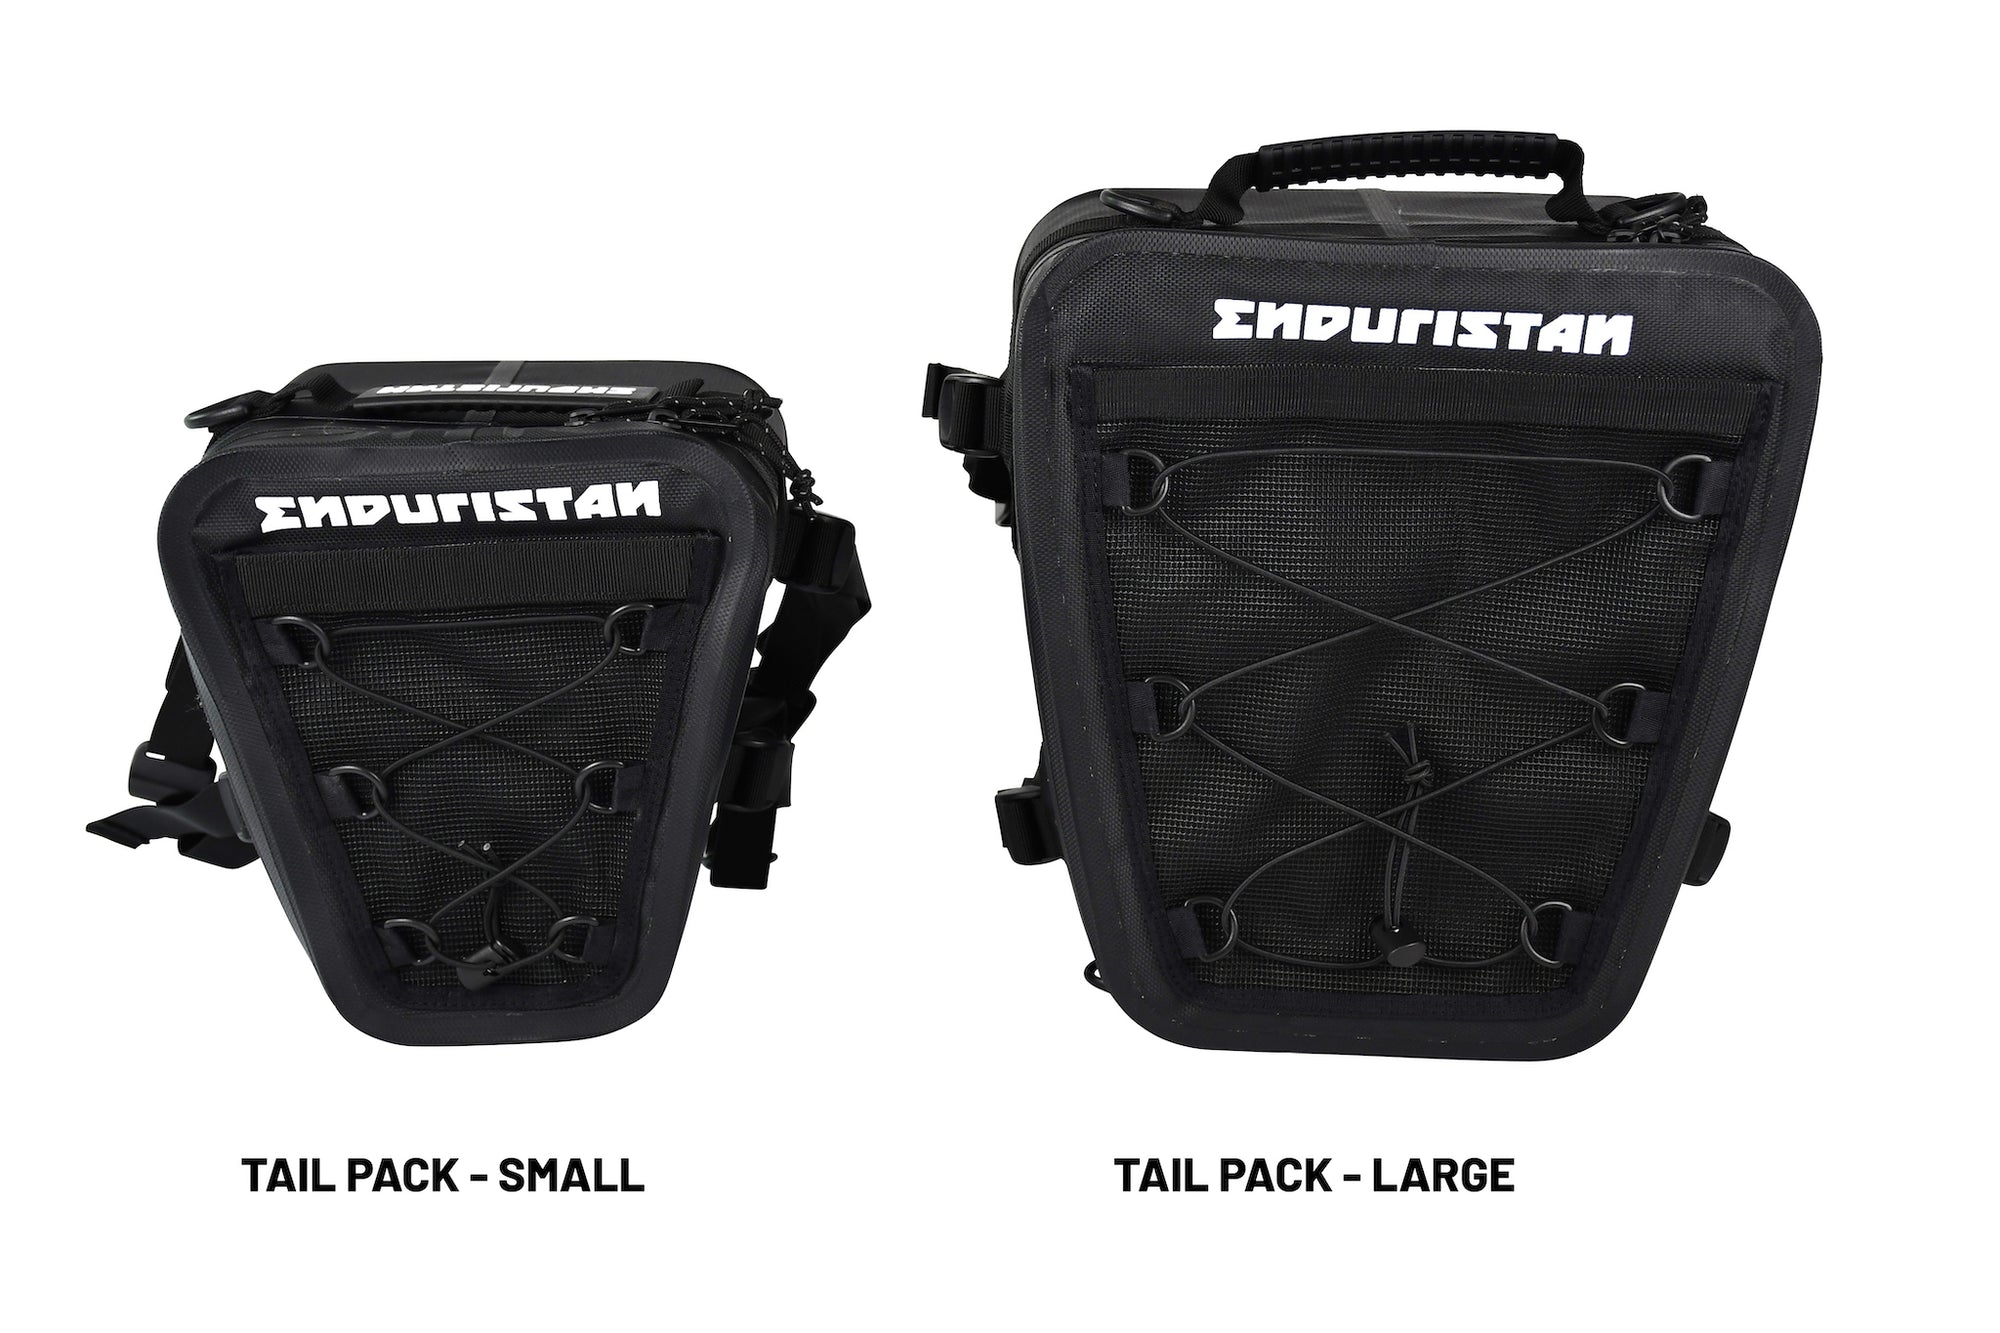 Tail Pack - Small